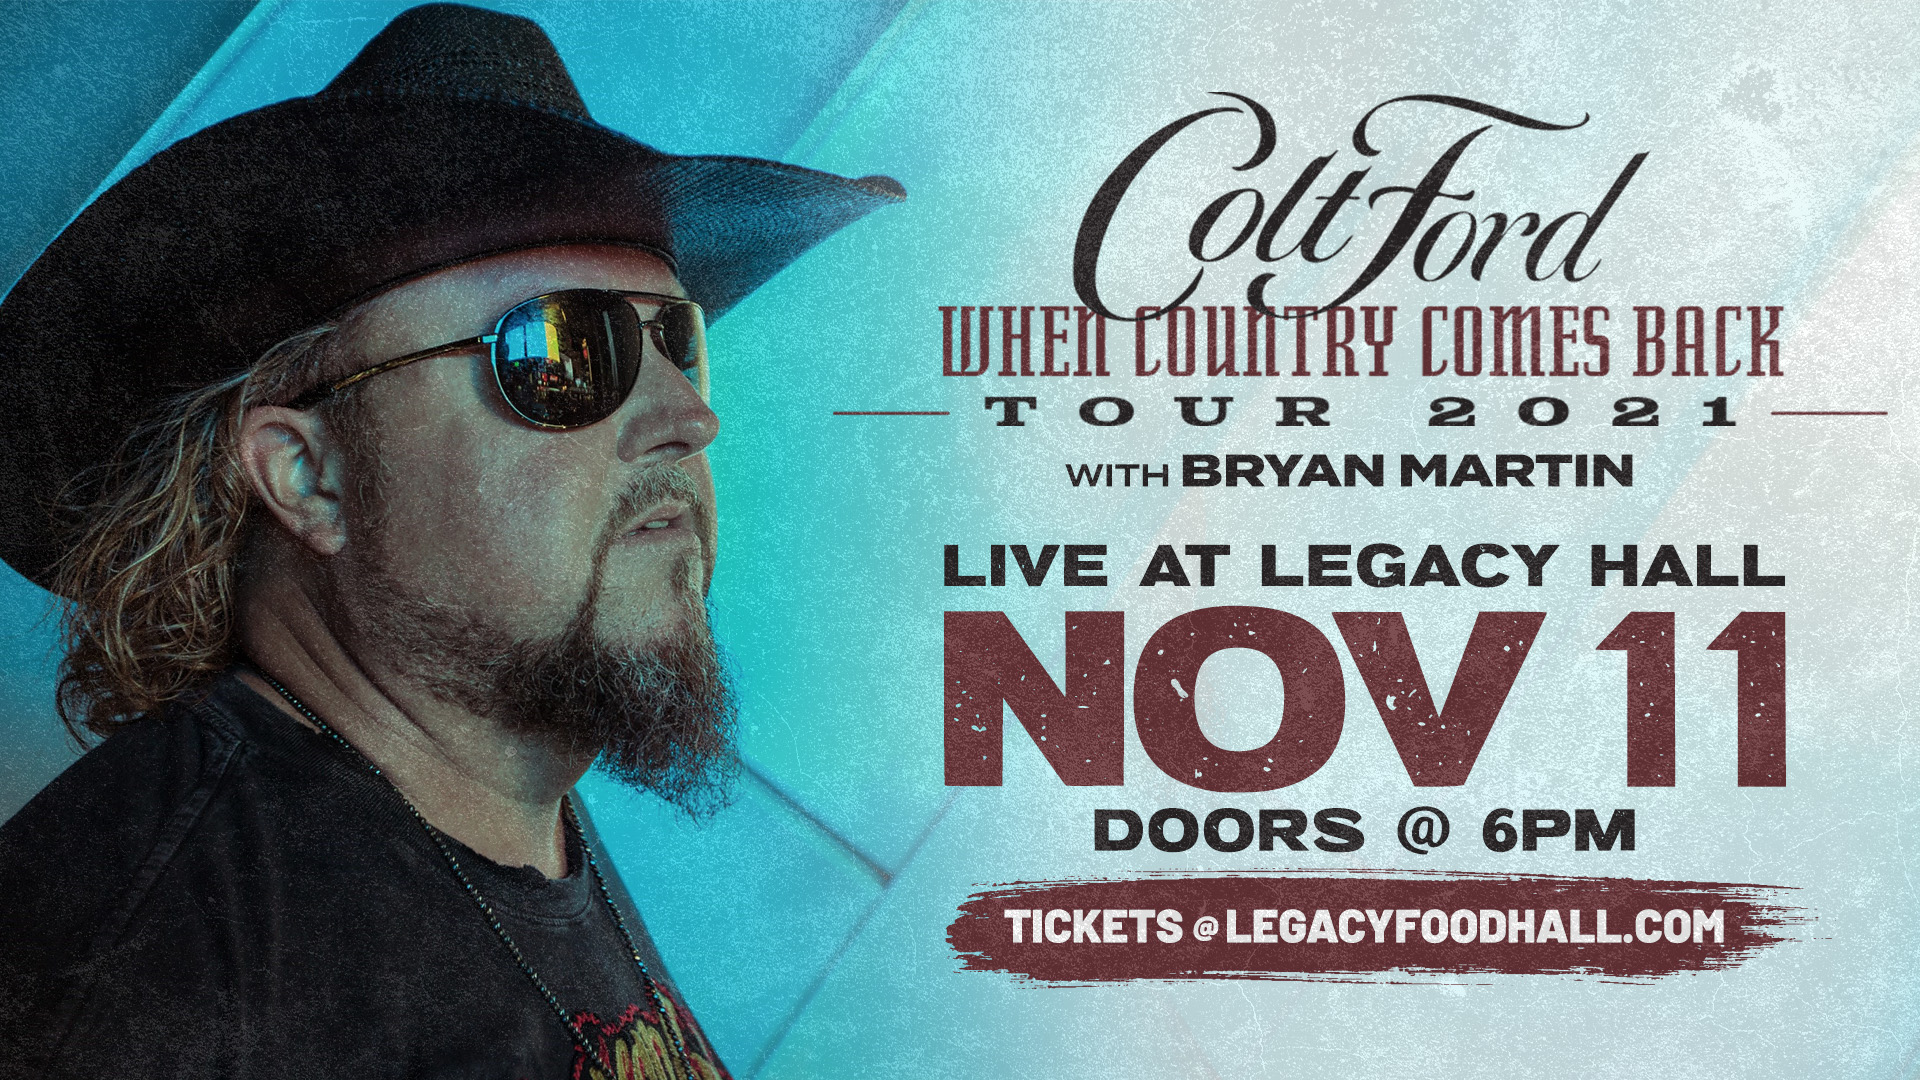 Veteran’s Day with Colt Ford - hero